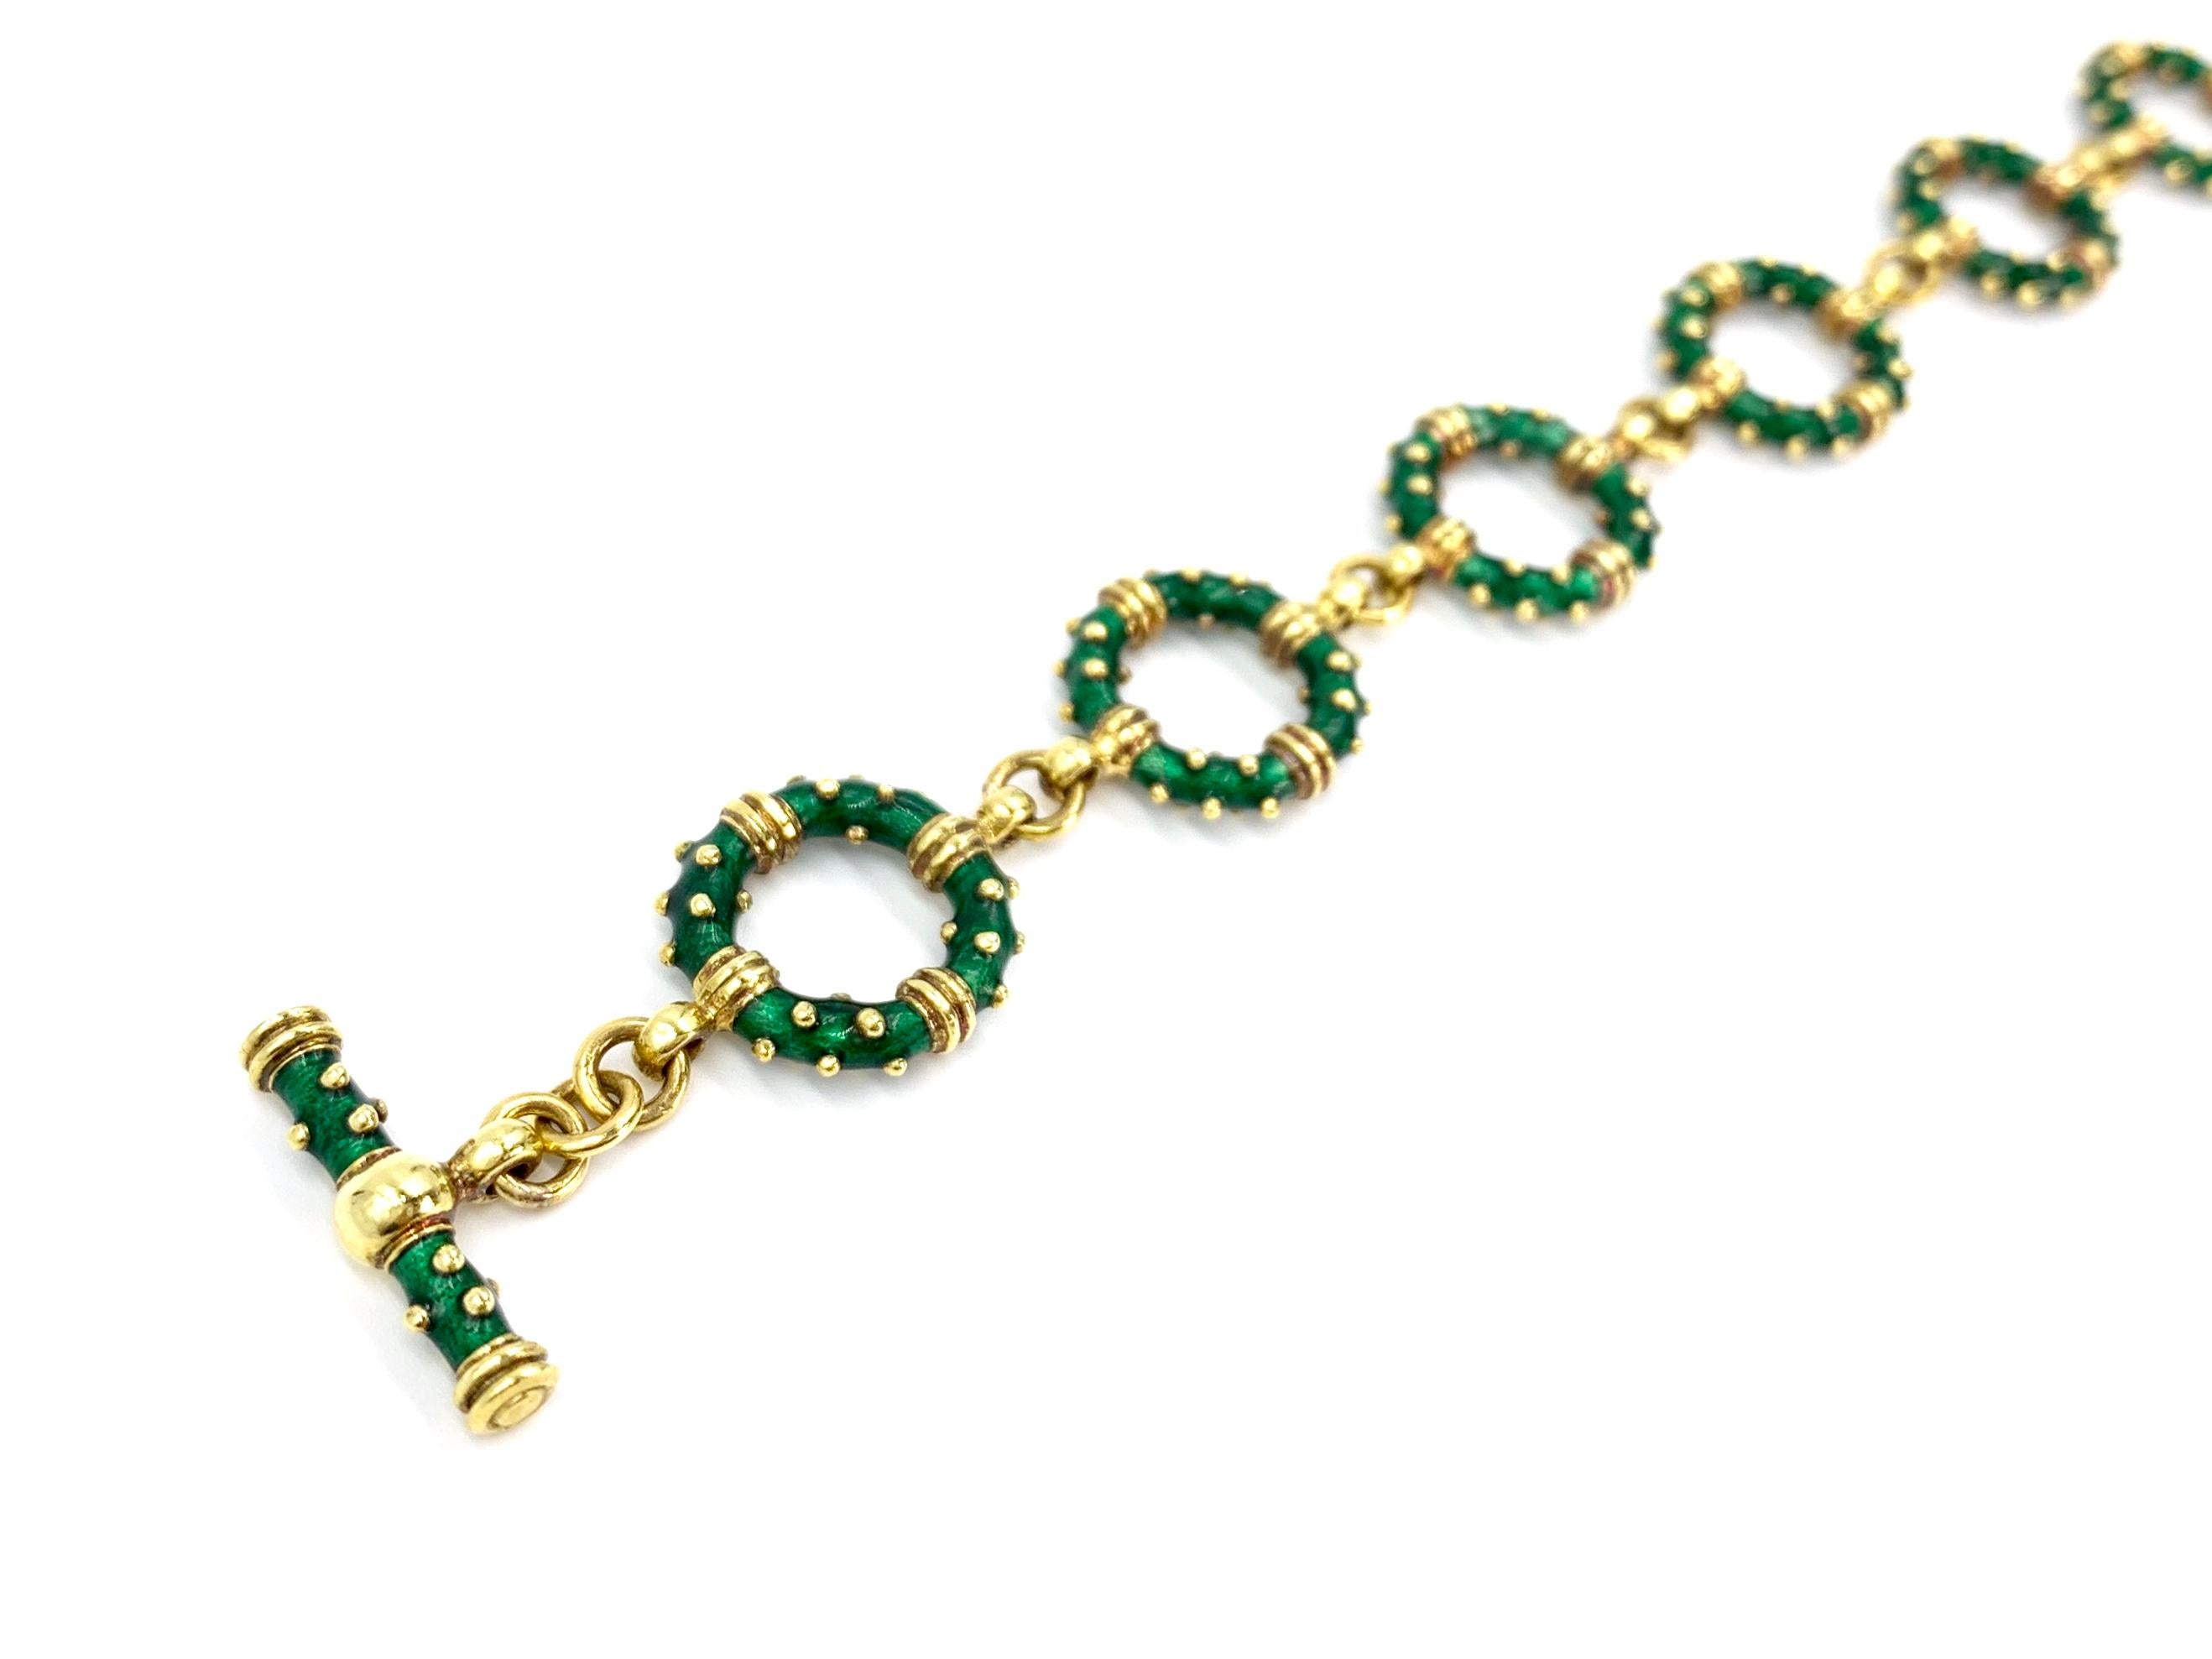 Hidalgo 18 Karat Green Enamel Circle Linked Bracelet In Excellent Condition For Sale In Pikesville, MD